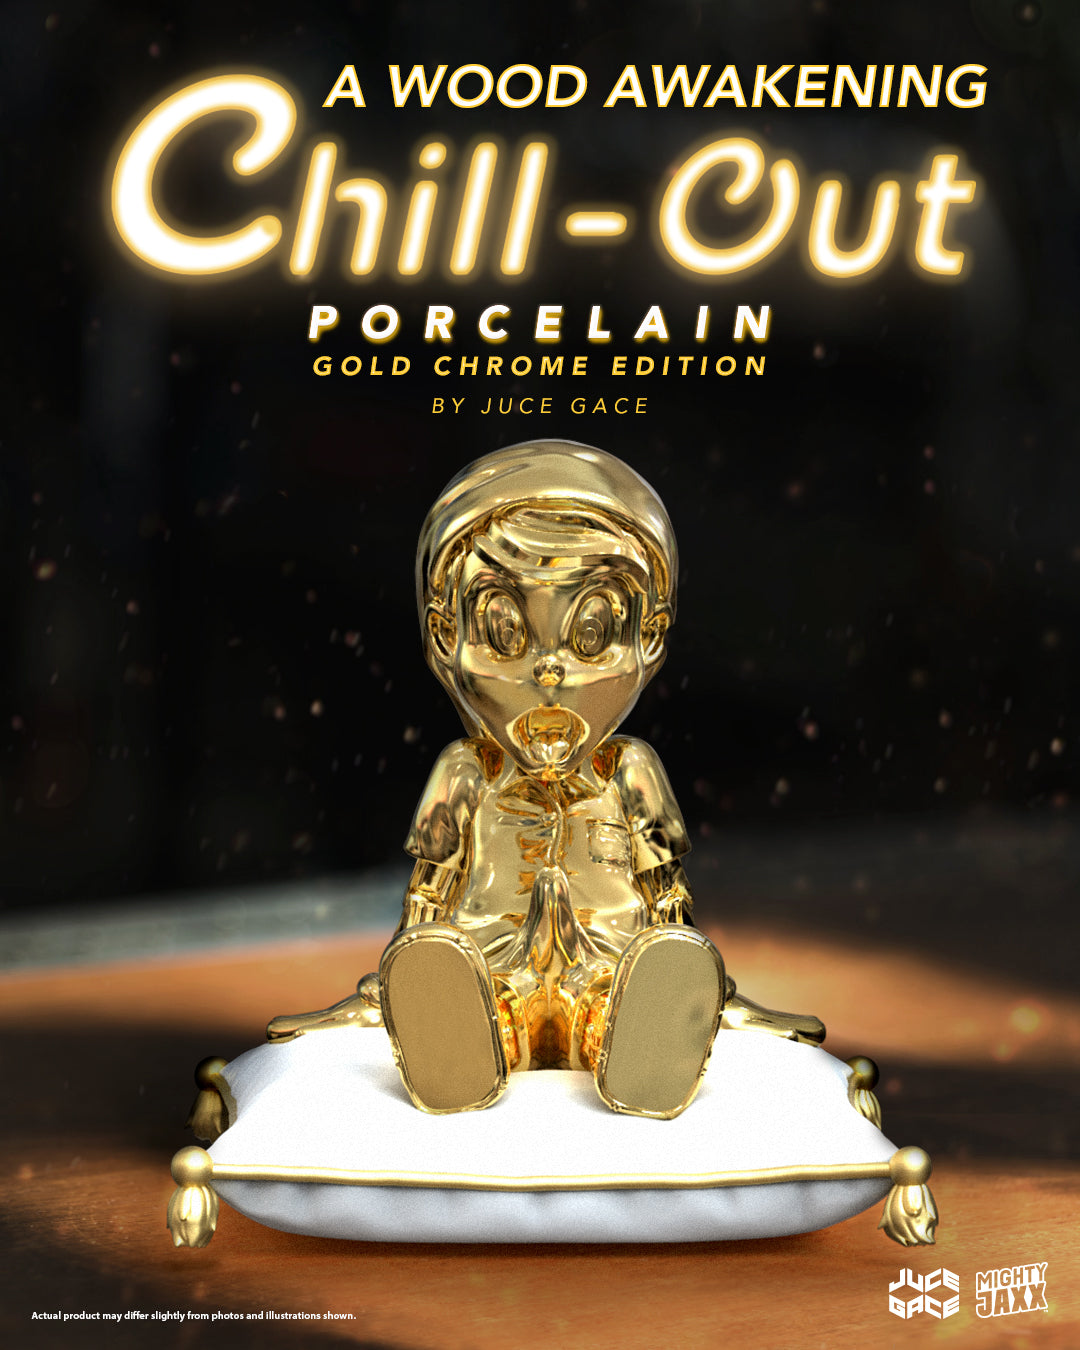 A Wood Awakening Chill-Out: Porcelain (Gold Chrome Edition) by Juce Gace